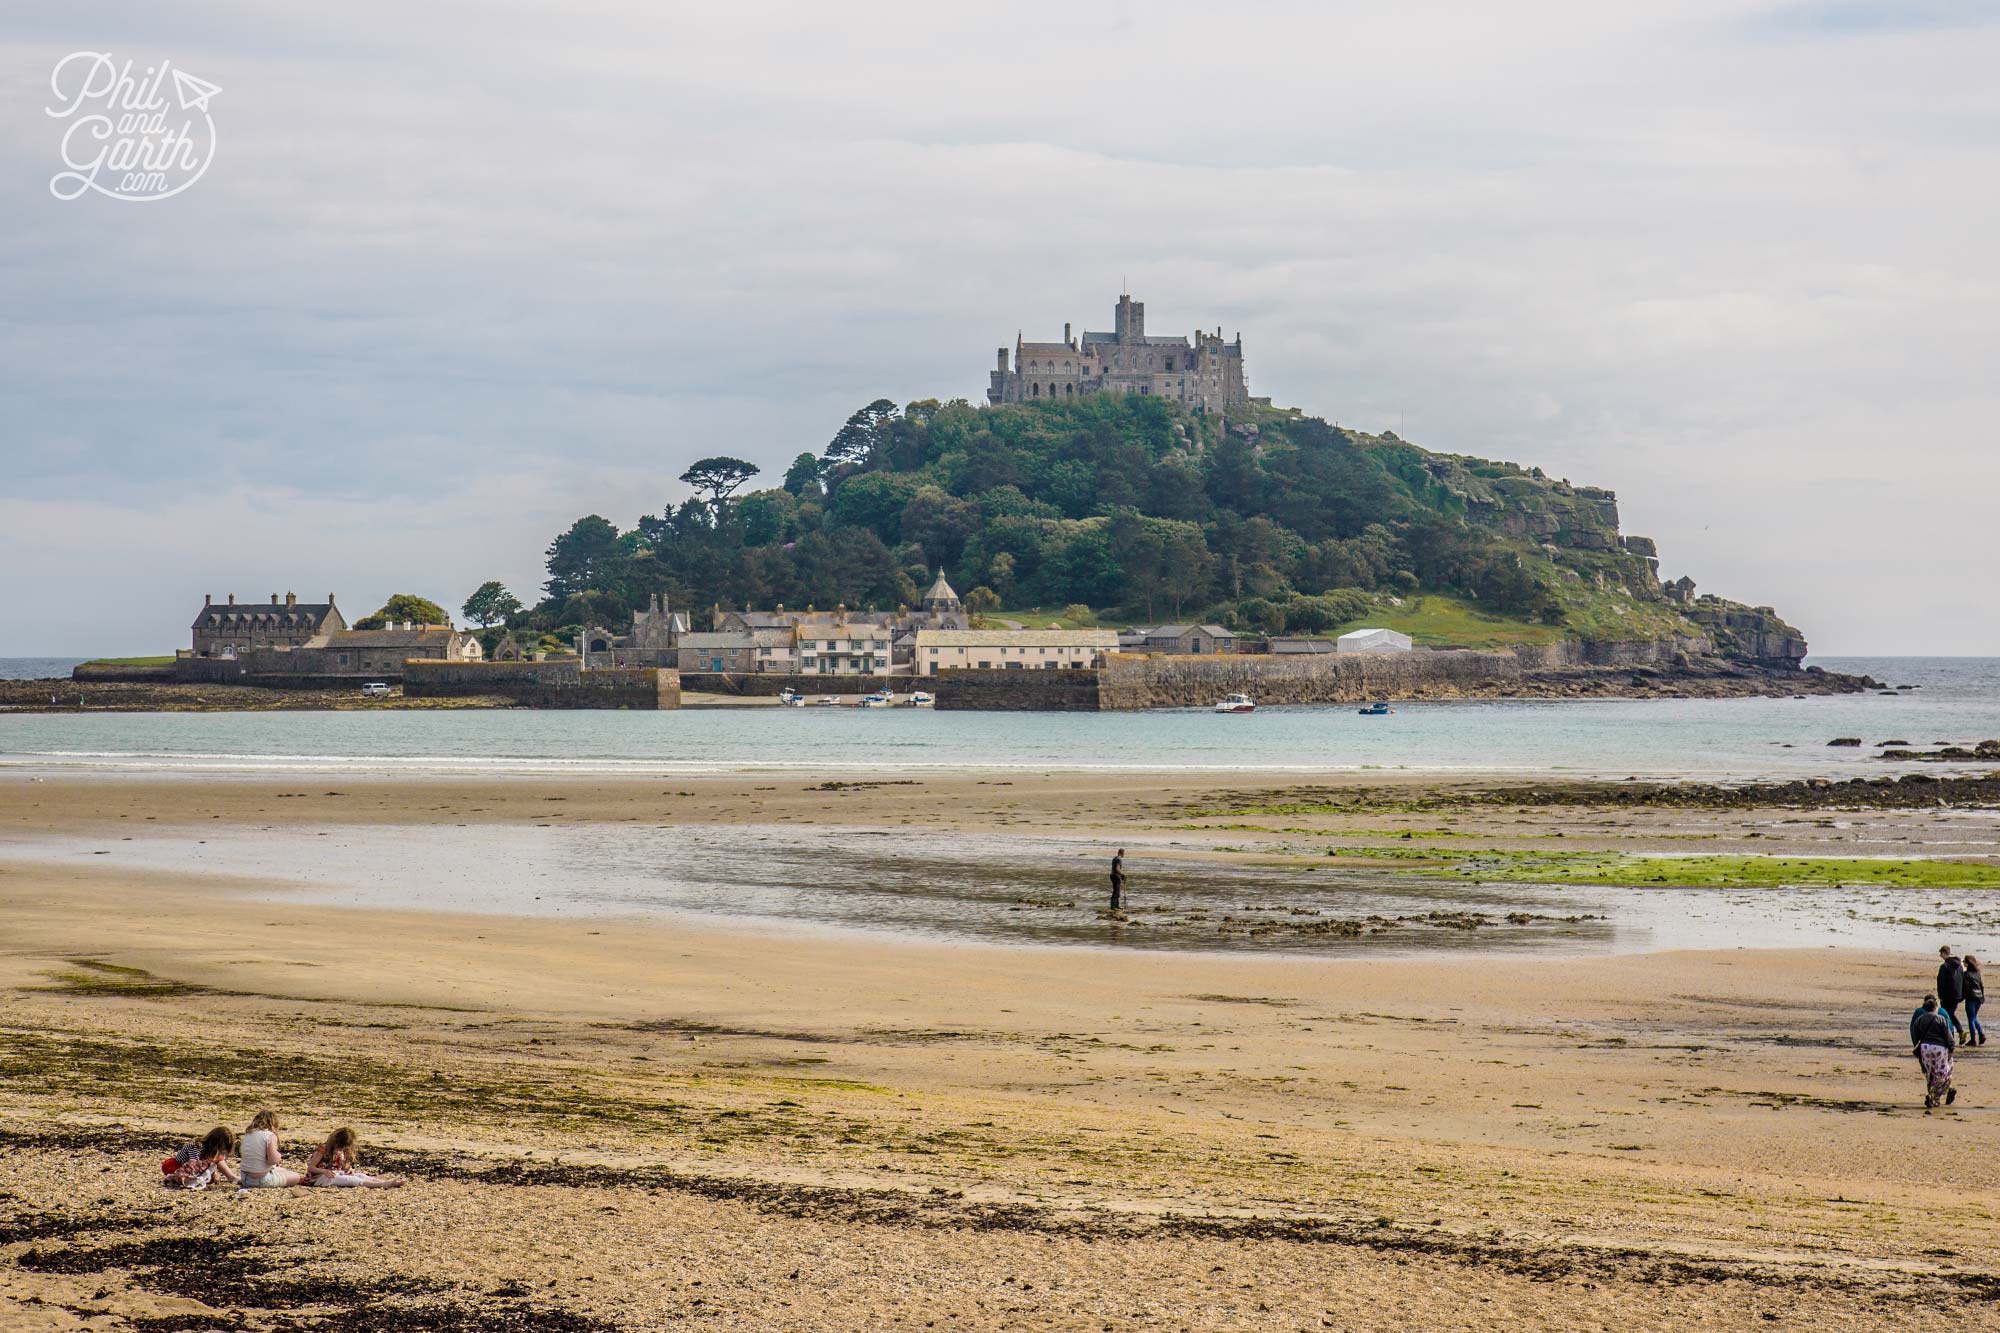 The dramatic tidal island of St Michael’s Mount in Cornwall England